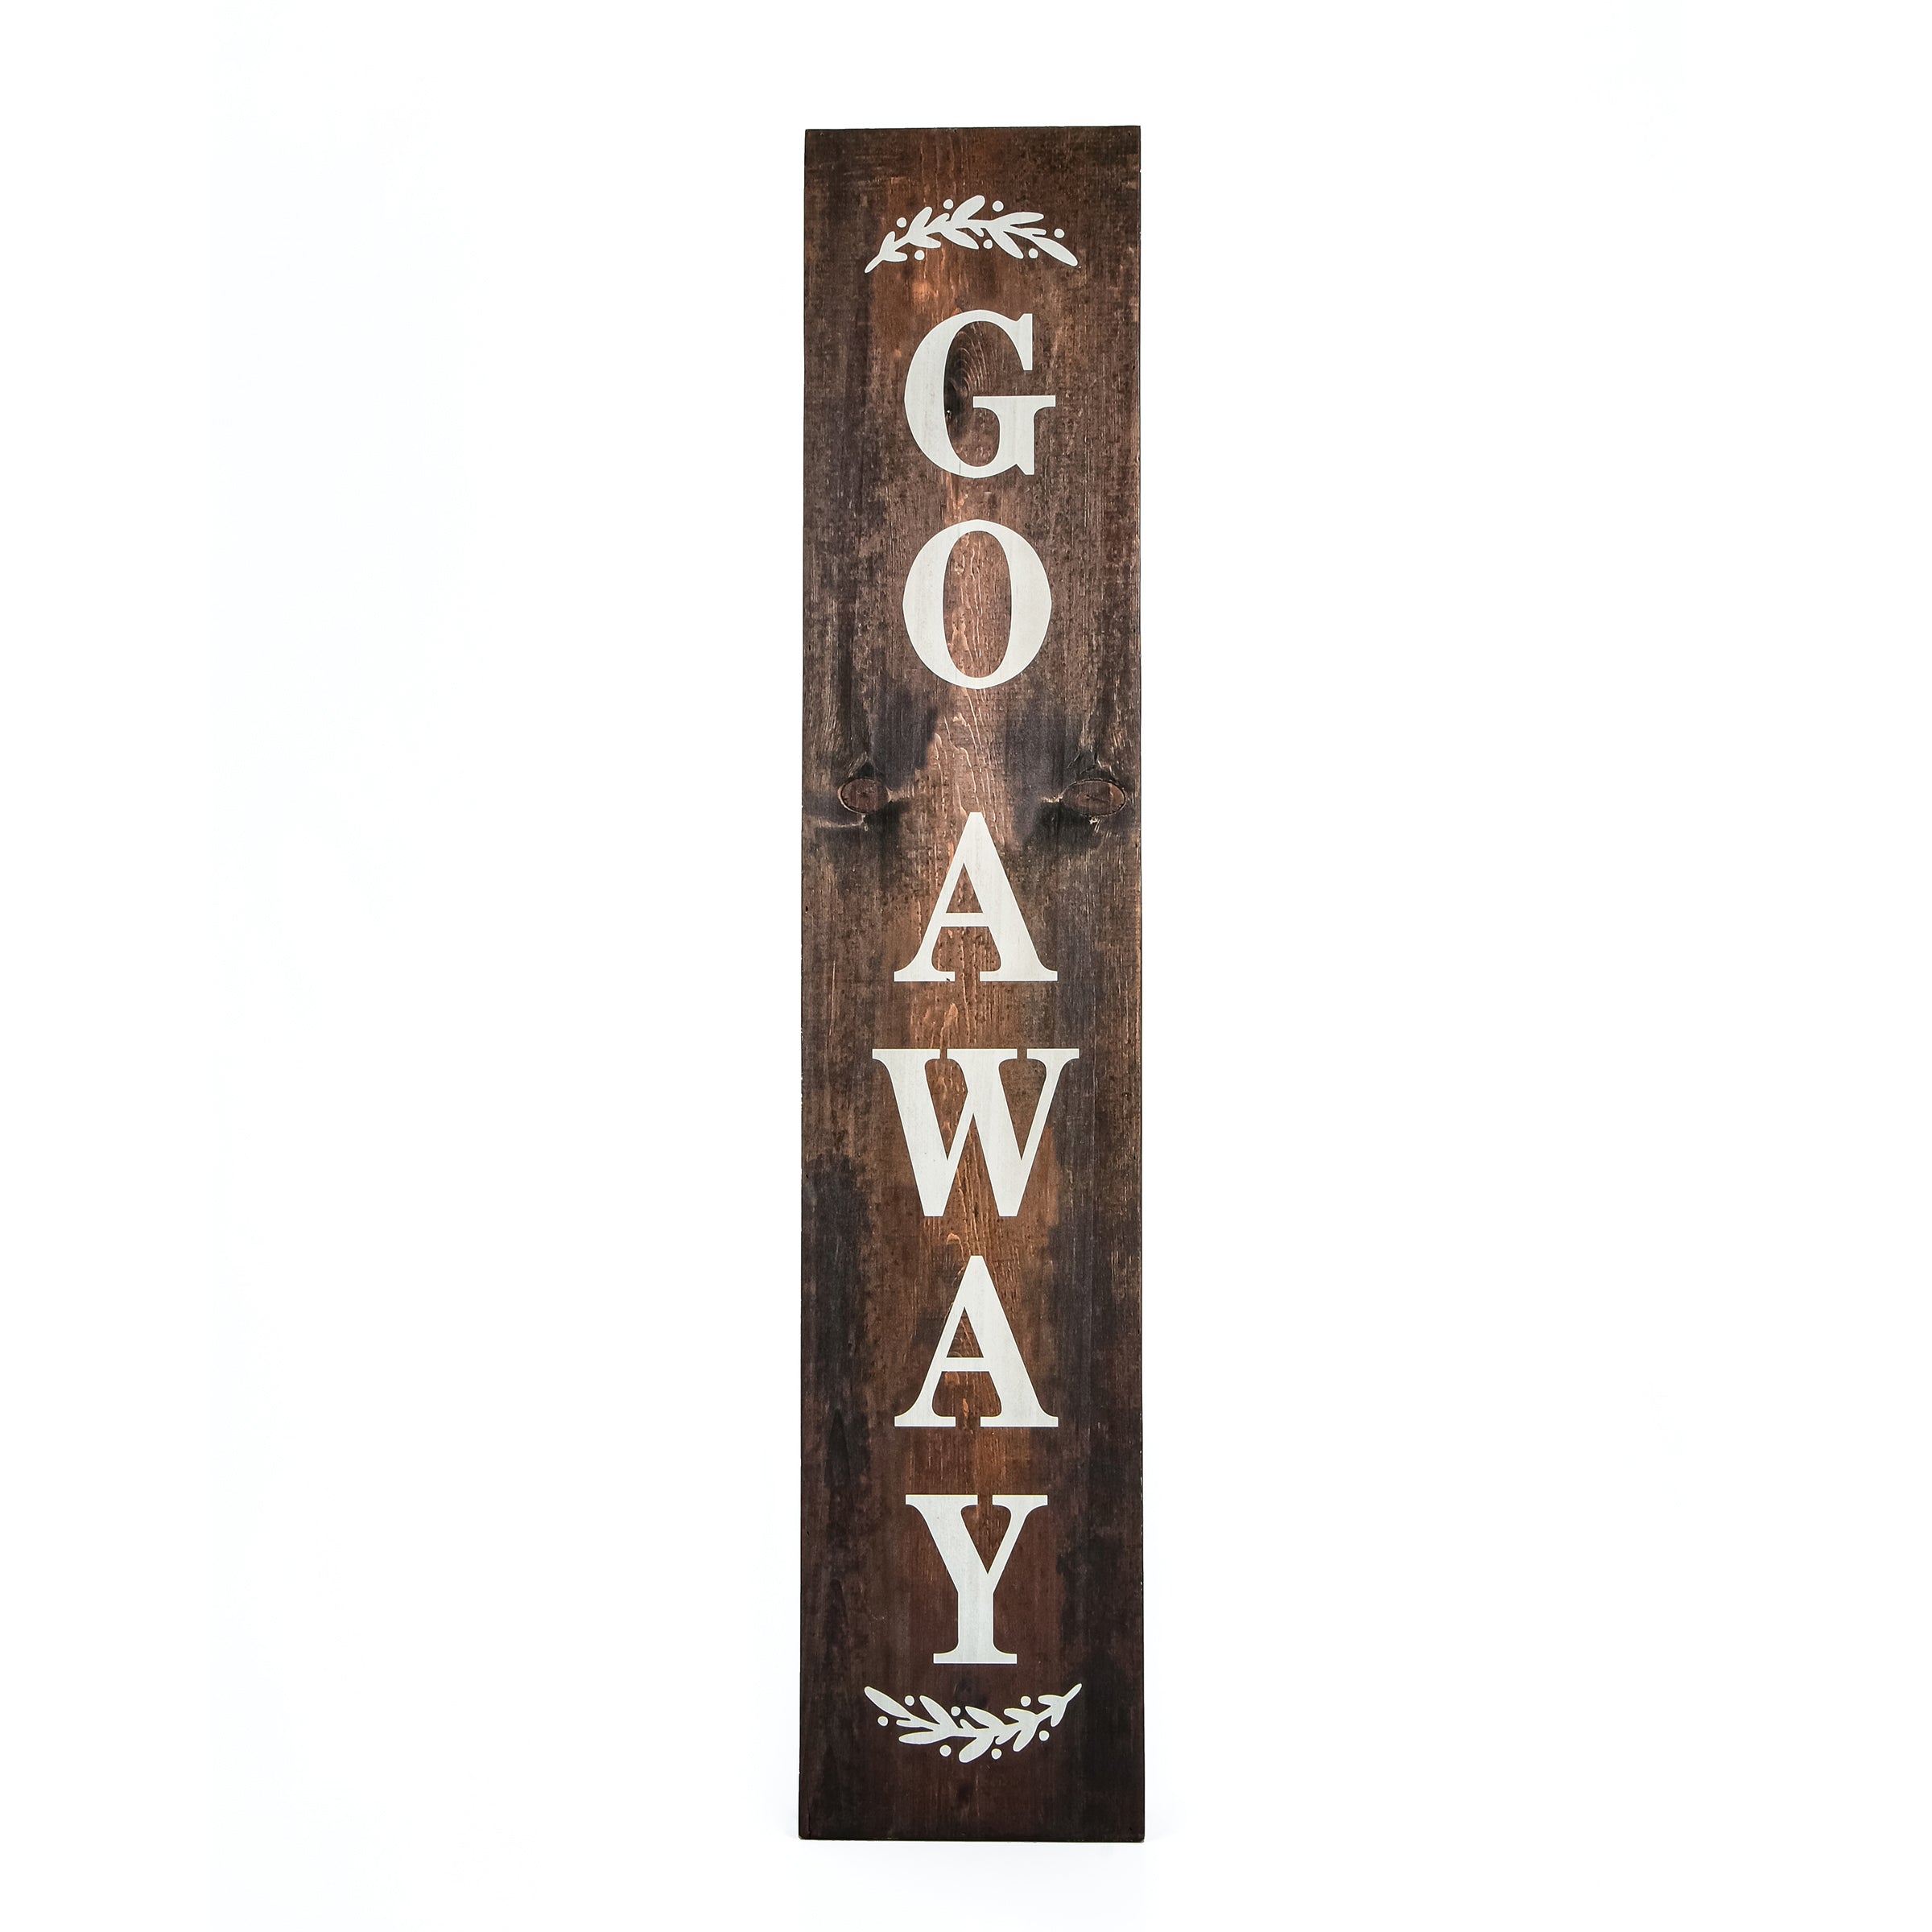 Halloween Hanging Porch Sign, Brown, 'Go Away', Wooden Construction, 39 Inches